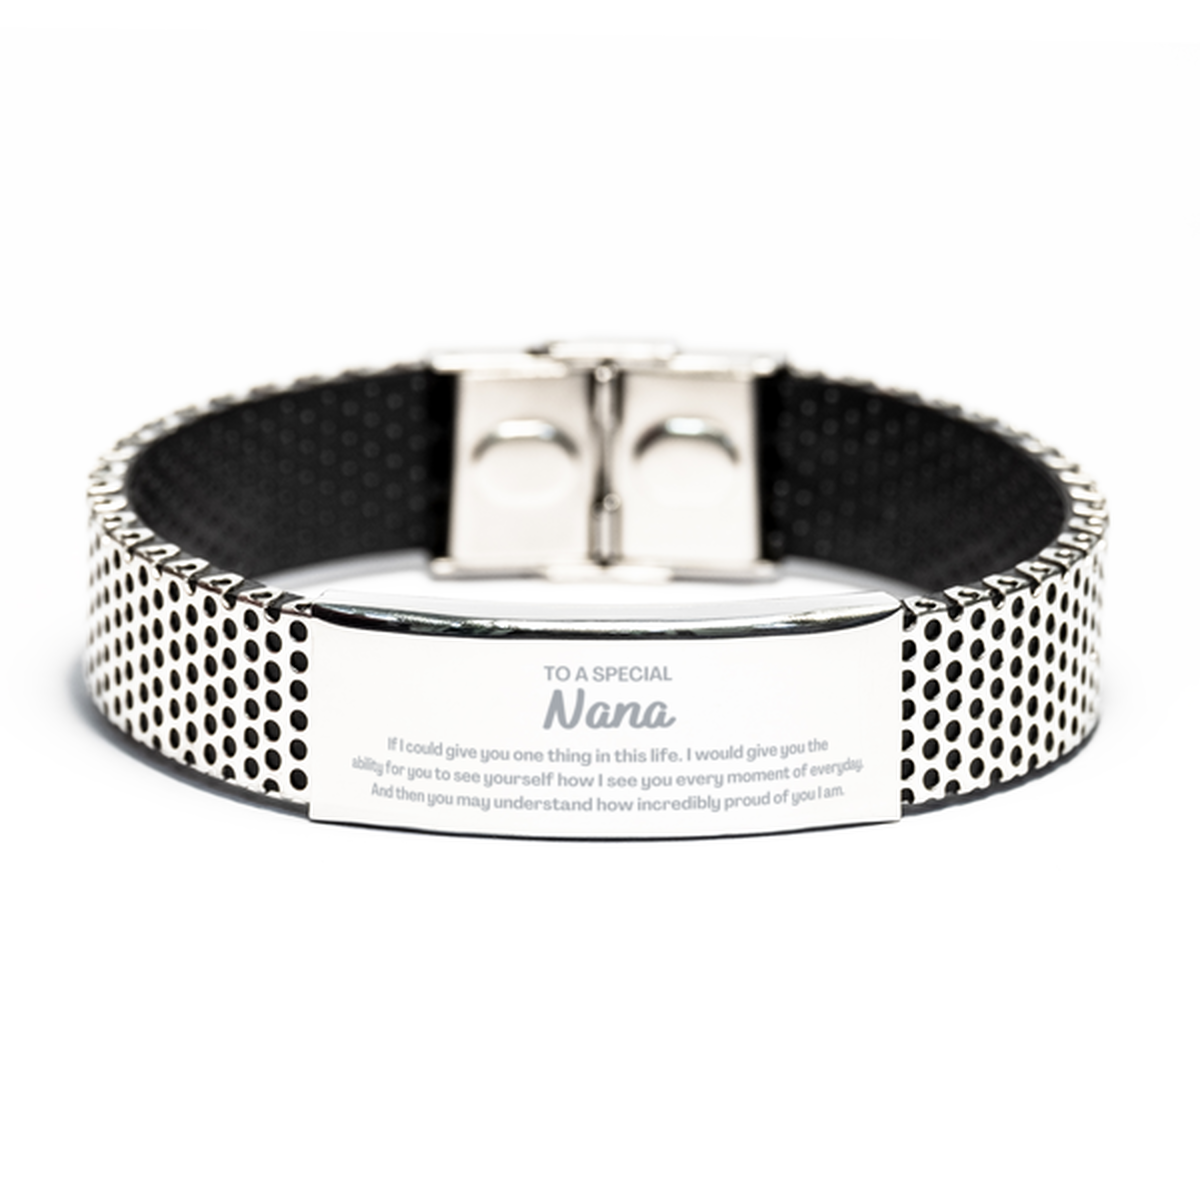 To My Nana Stainless Steel Bracelet, Gifts For Nana Engraved, Inspirational Gifts for Christmas Birthday, Epic Gifts for Nana To A Special Nana how incredibly proud of you I am